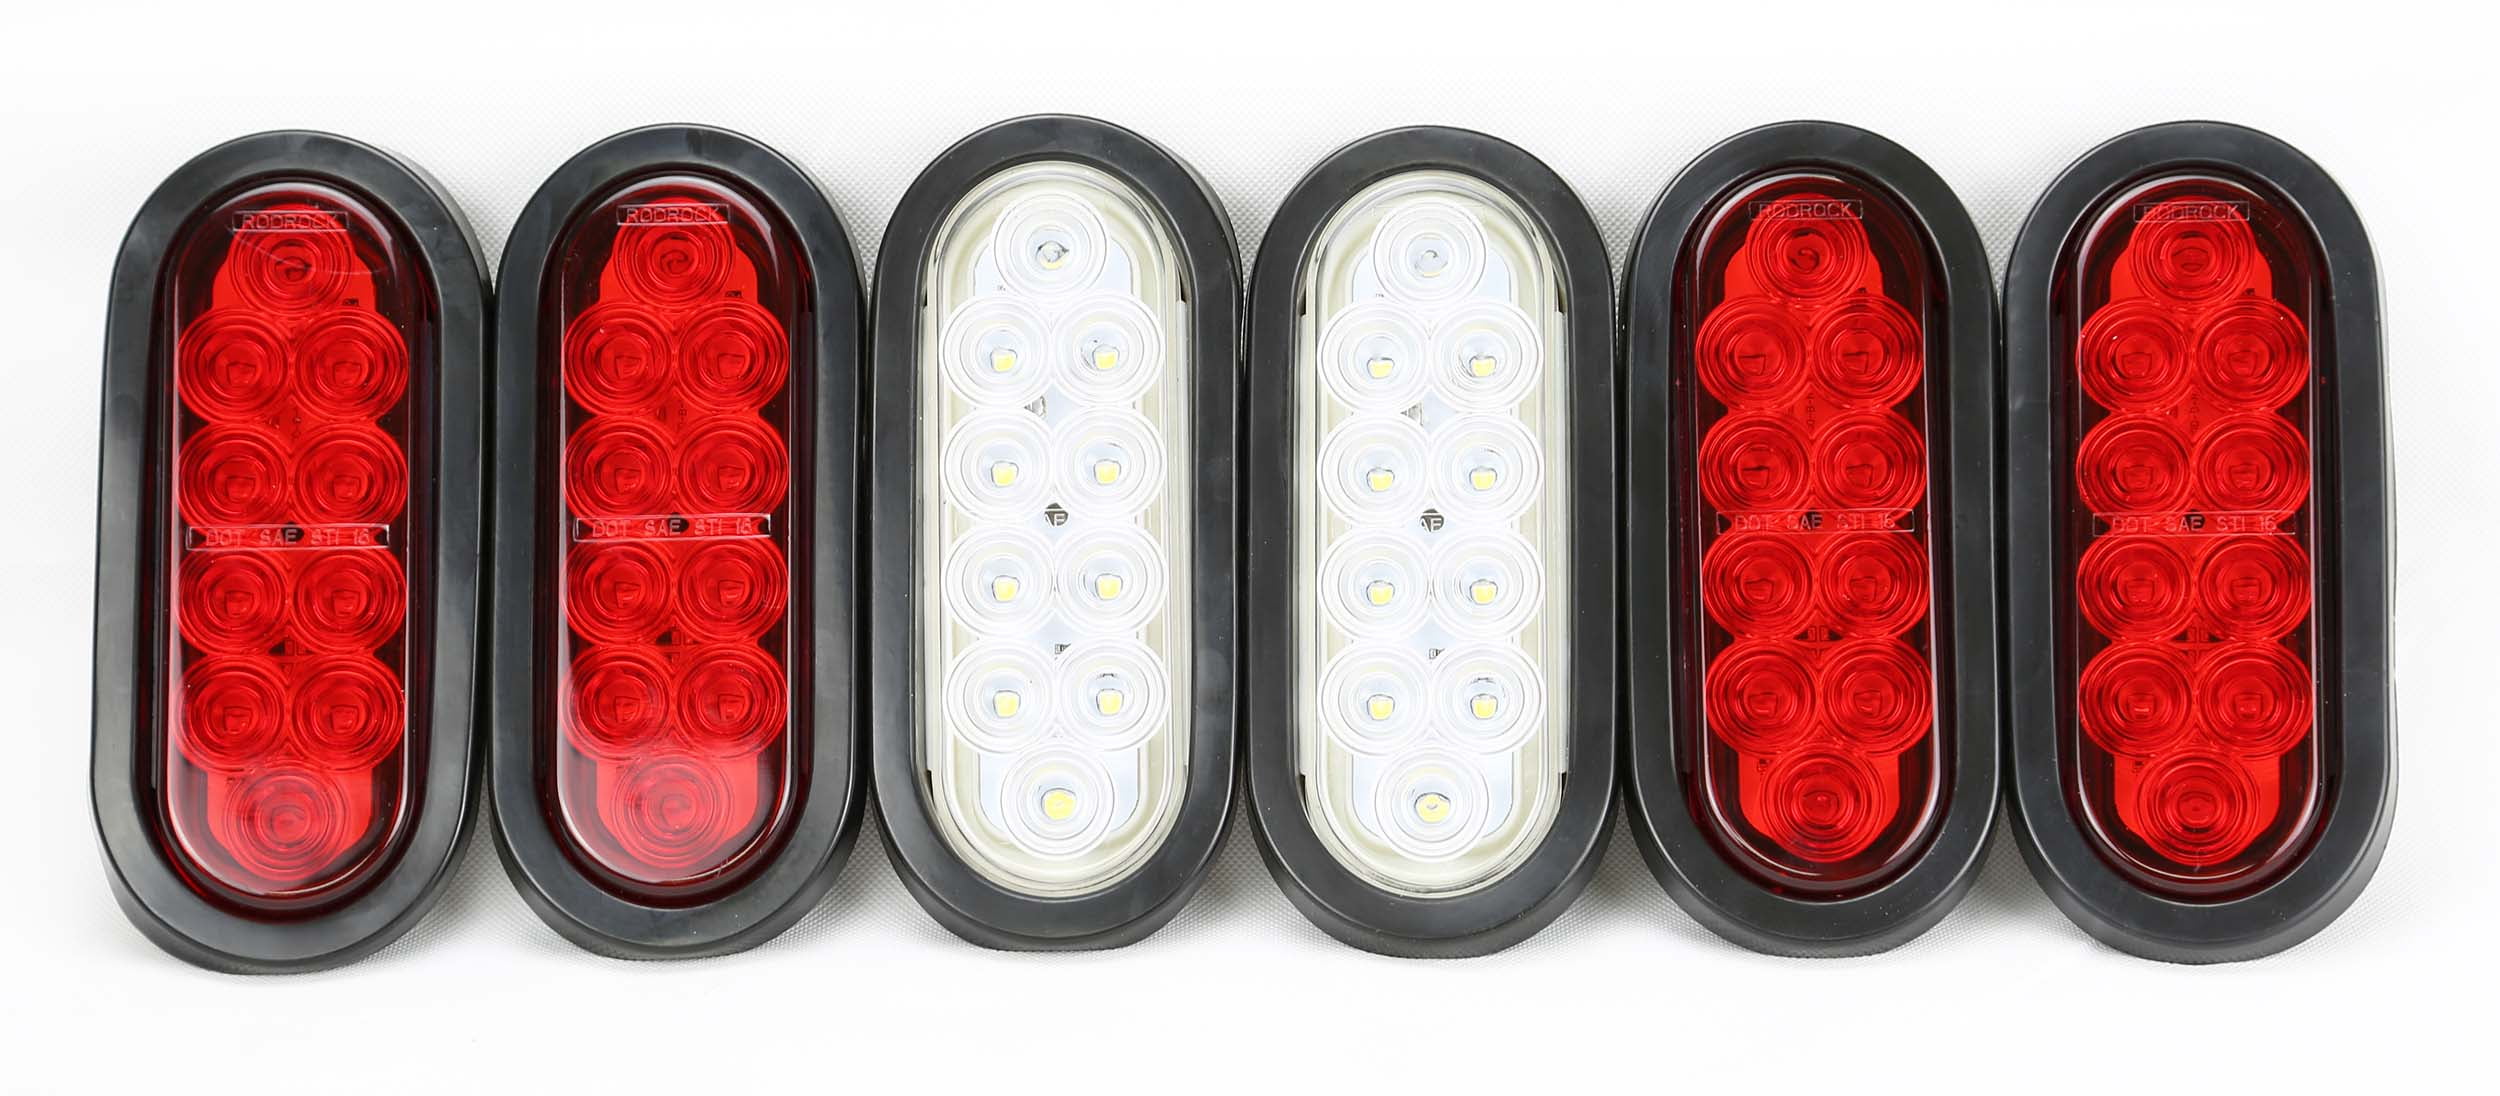 2 Red 6" Oval 10 LED Trailer Stop/Turn/Tail Light w/ Grommet and Plugs 24004